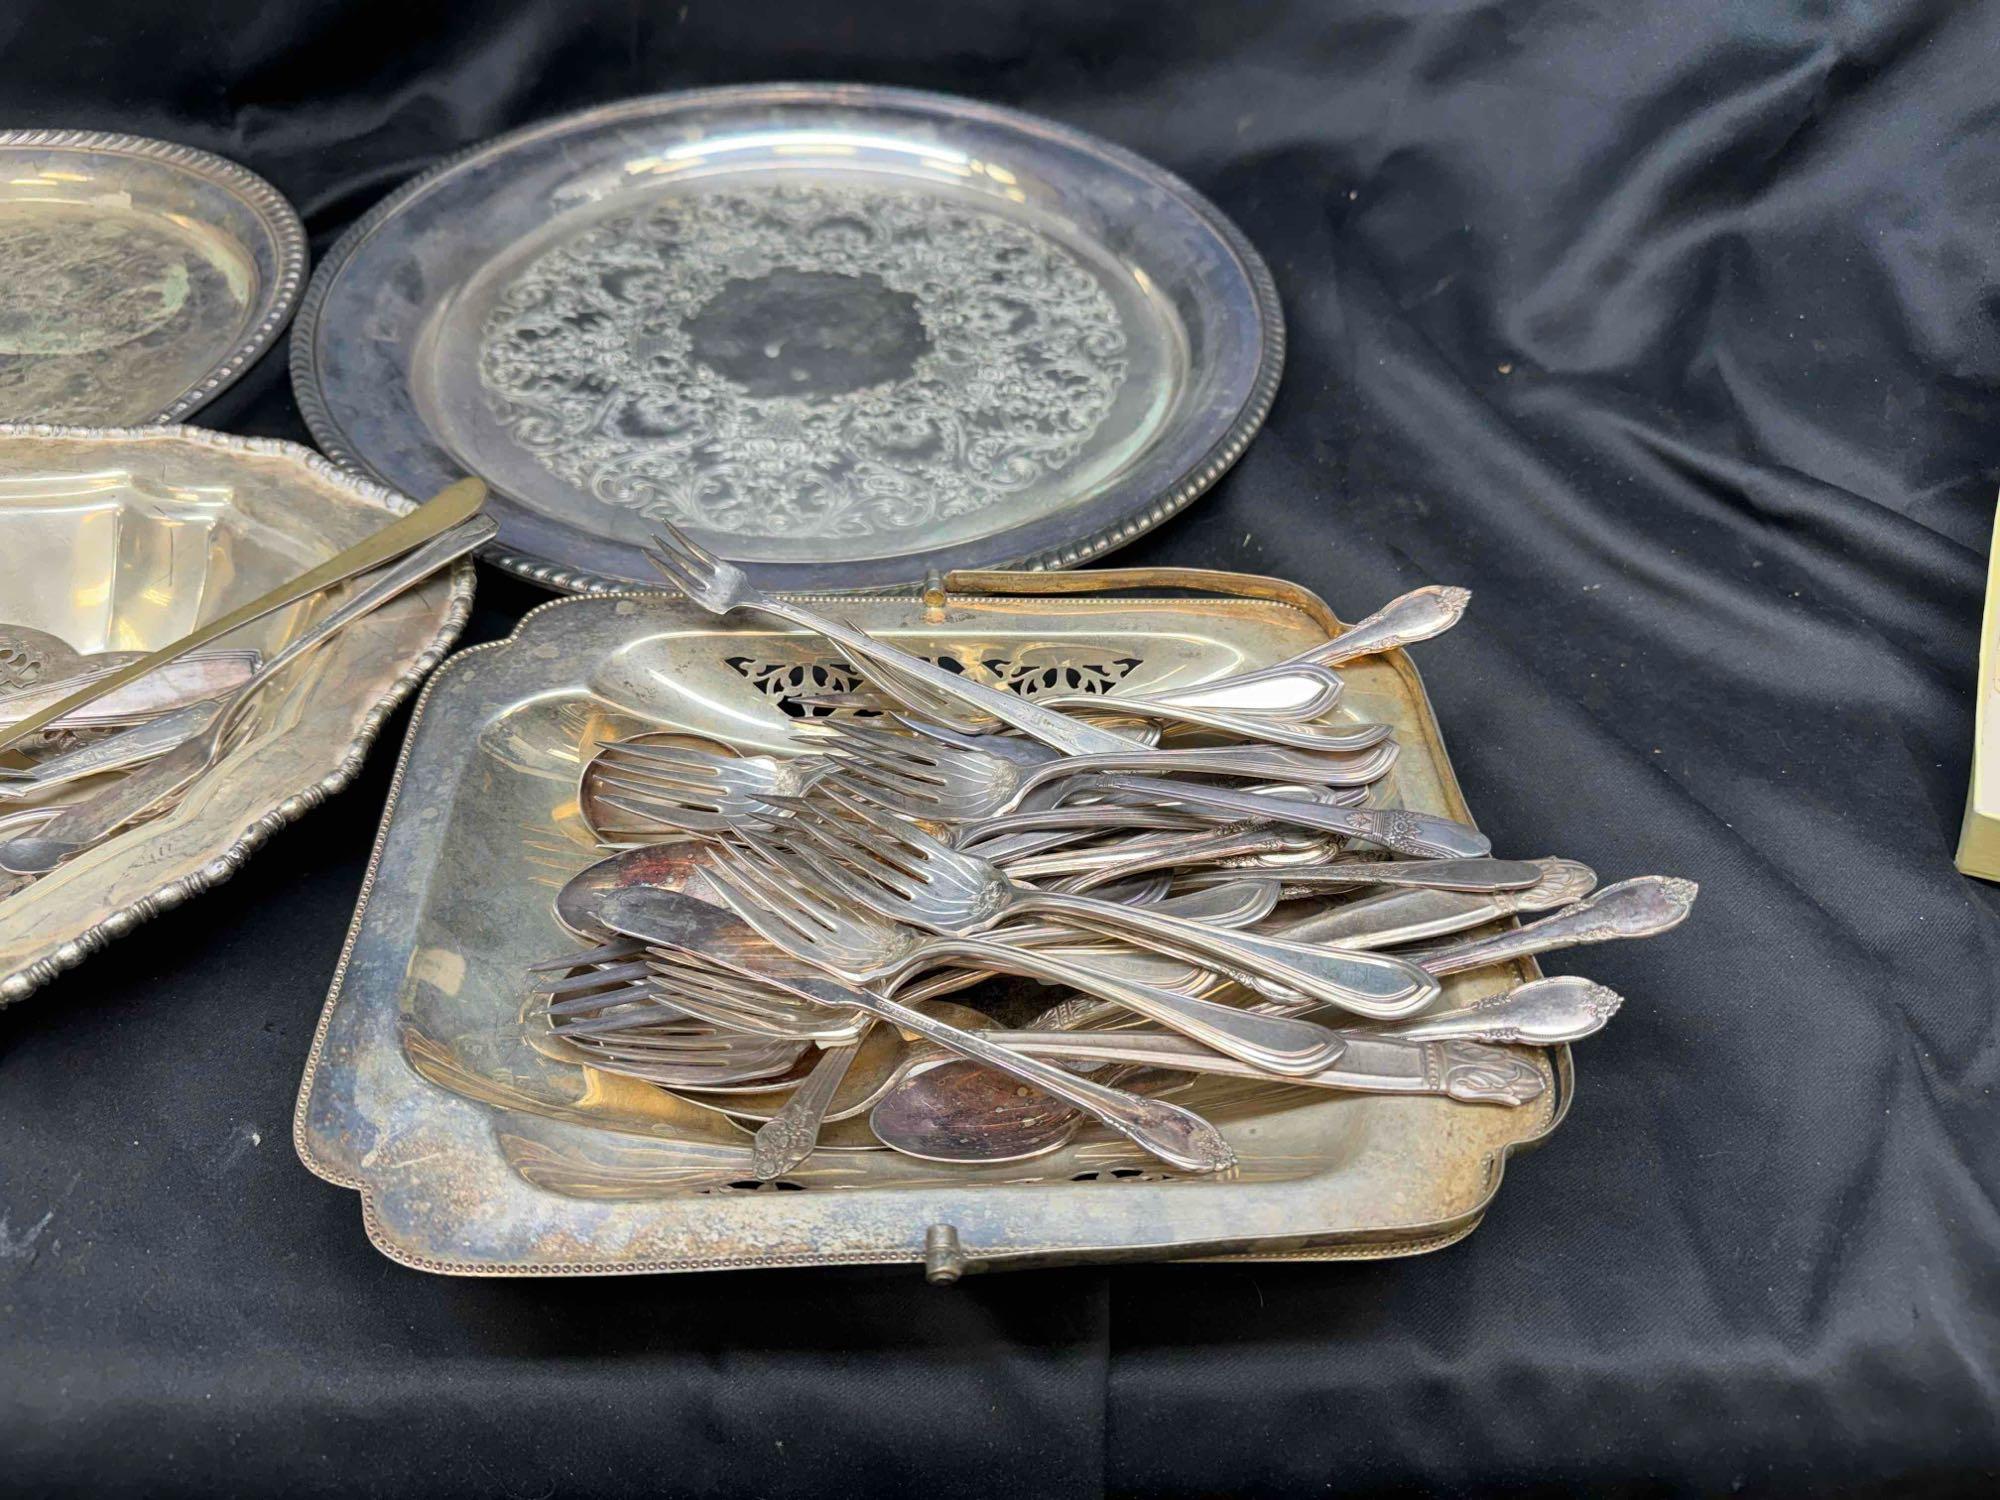 Silver Plated Kitchenware Flatware WM Rogers, GOWE SILBER, Sweden, Electro Nickleplate more